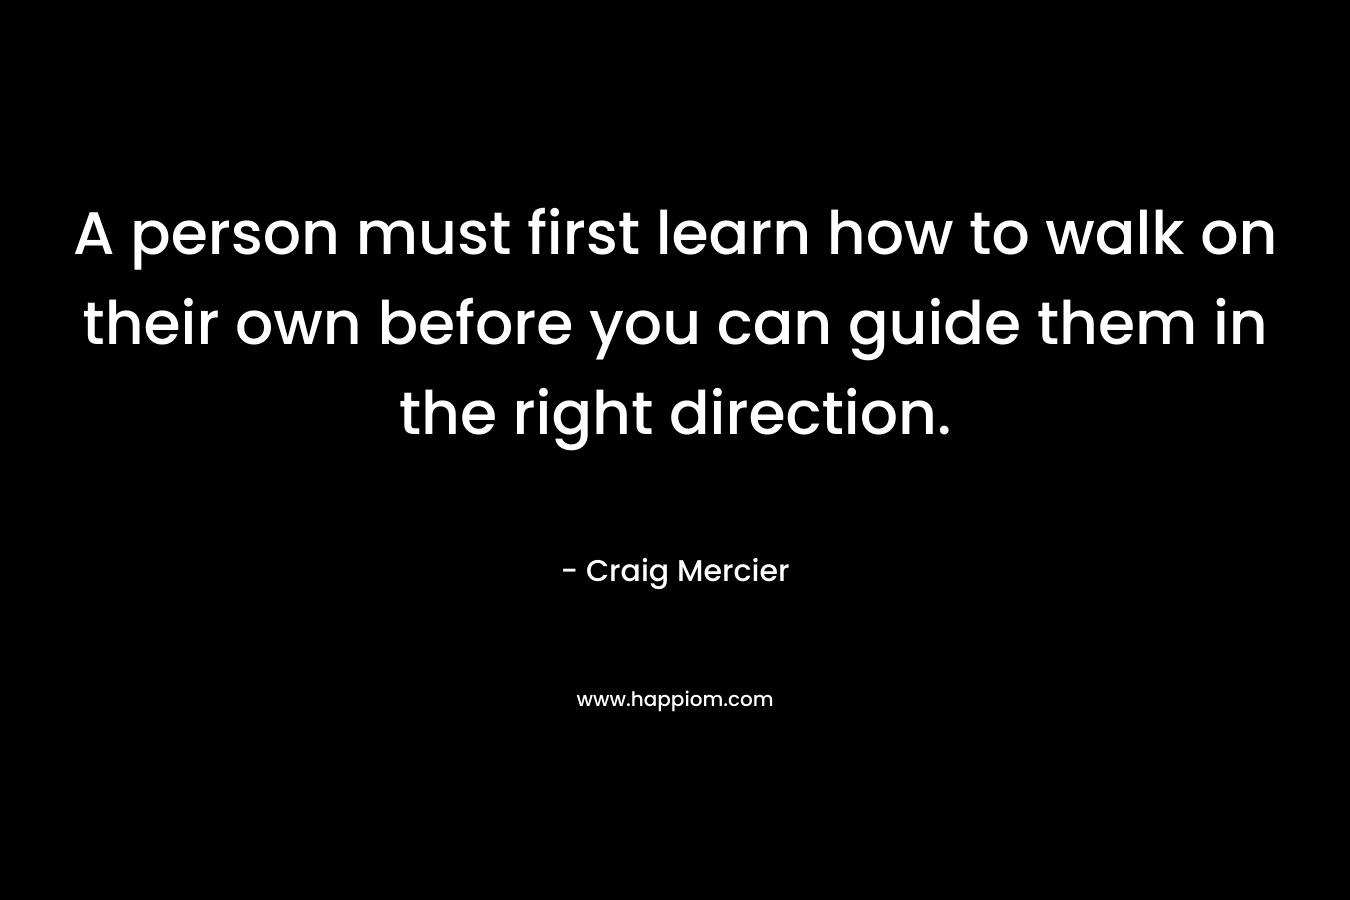 A person must first learn how to walk on their own before you can guide them in the right direction.